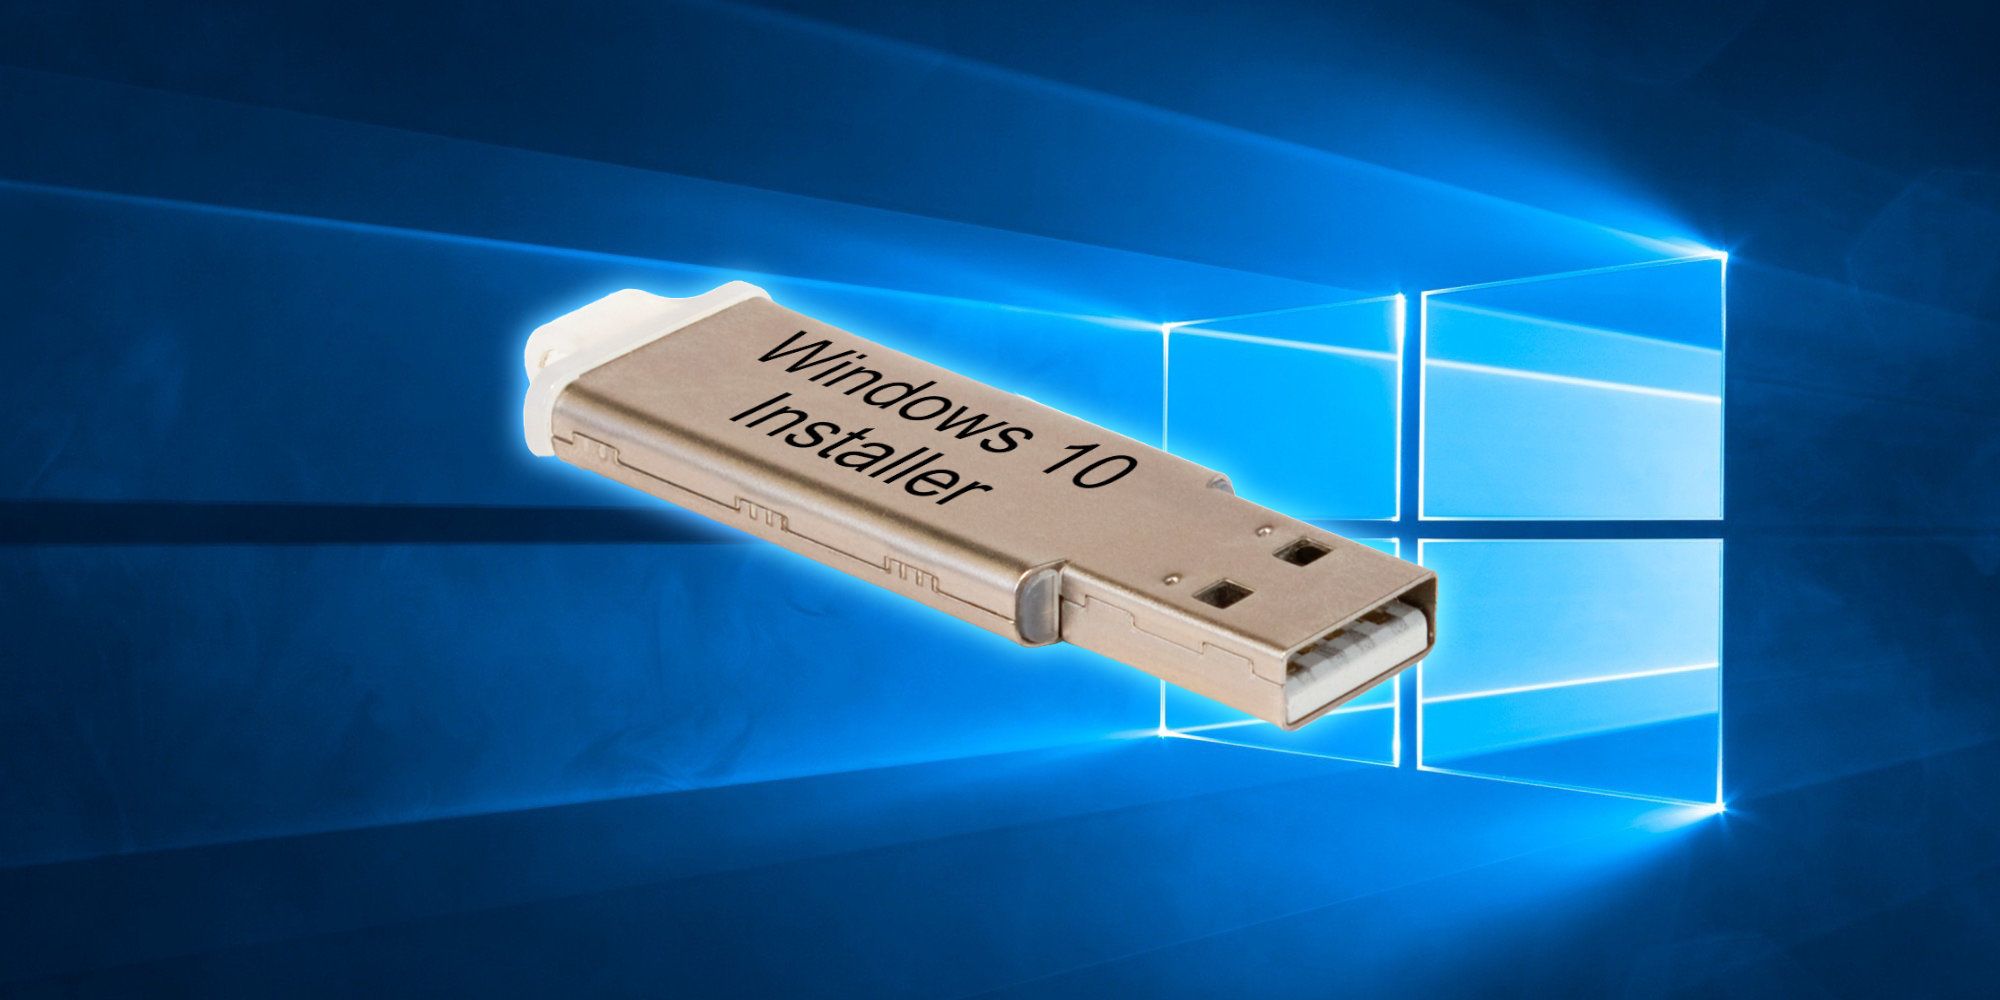 download windows 10 for usb install